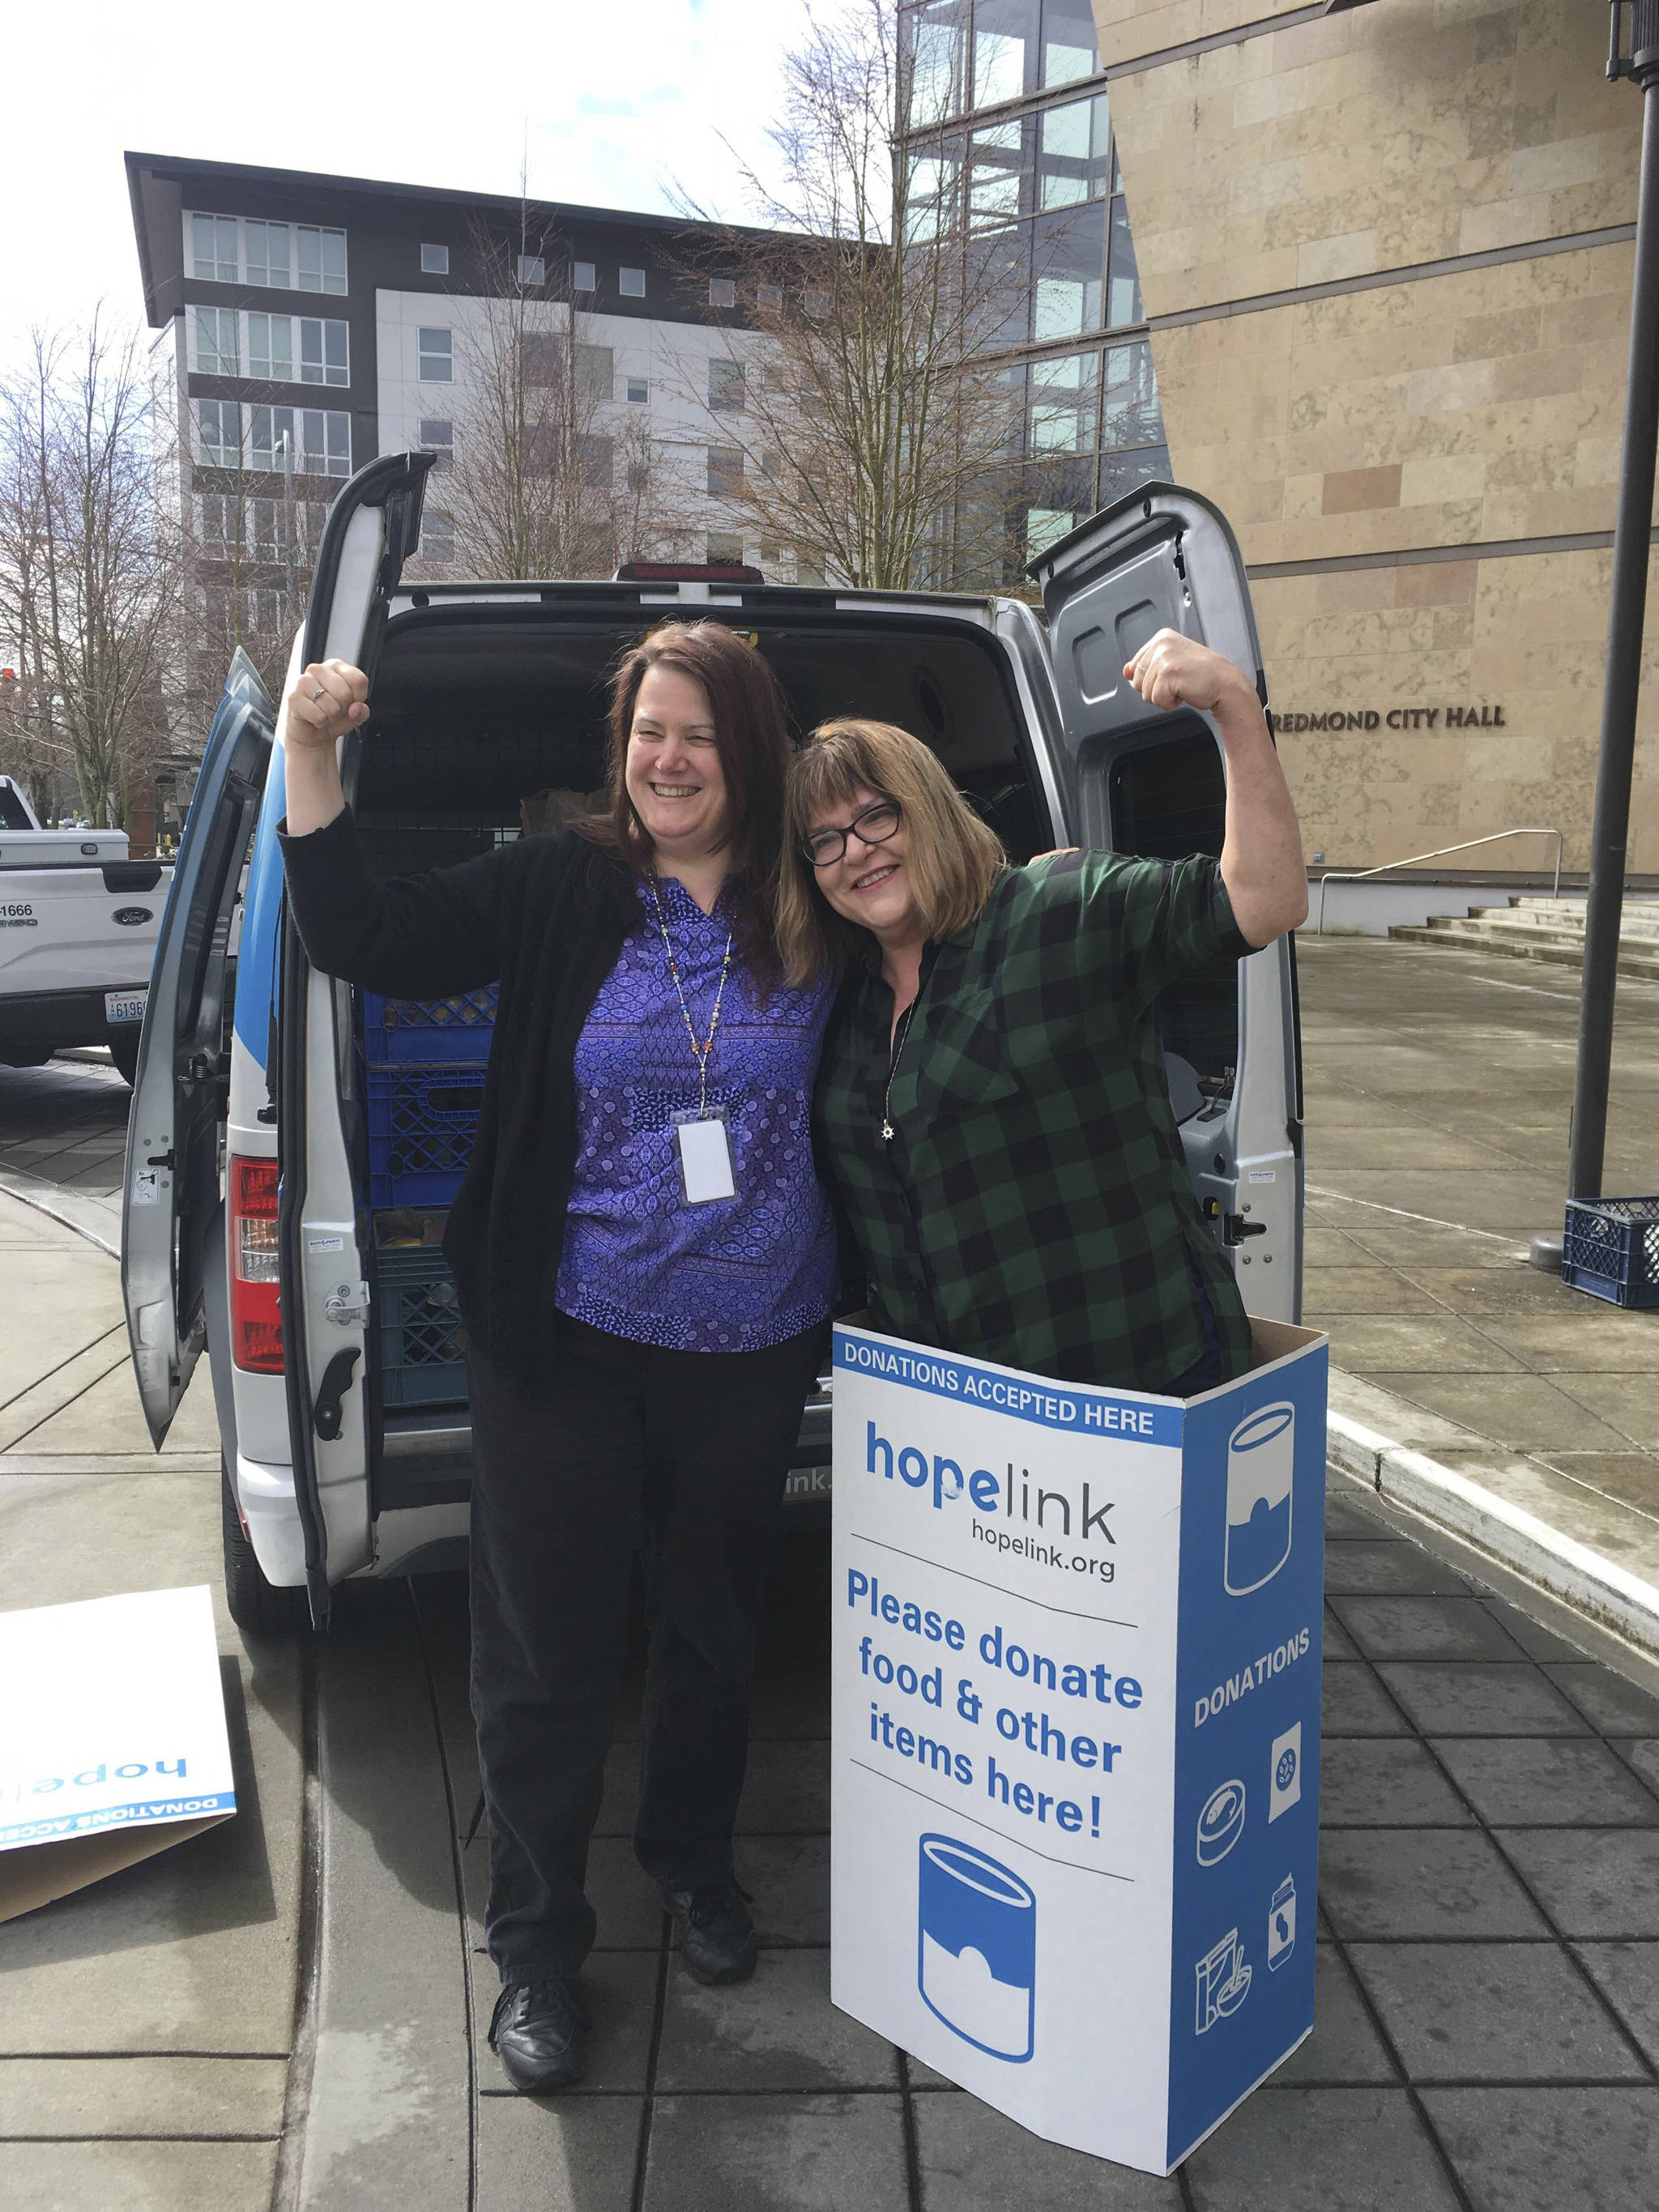 Marcy O’Hara and Betsie McLain with the City of Redmond. Courtesy photo